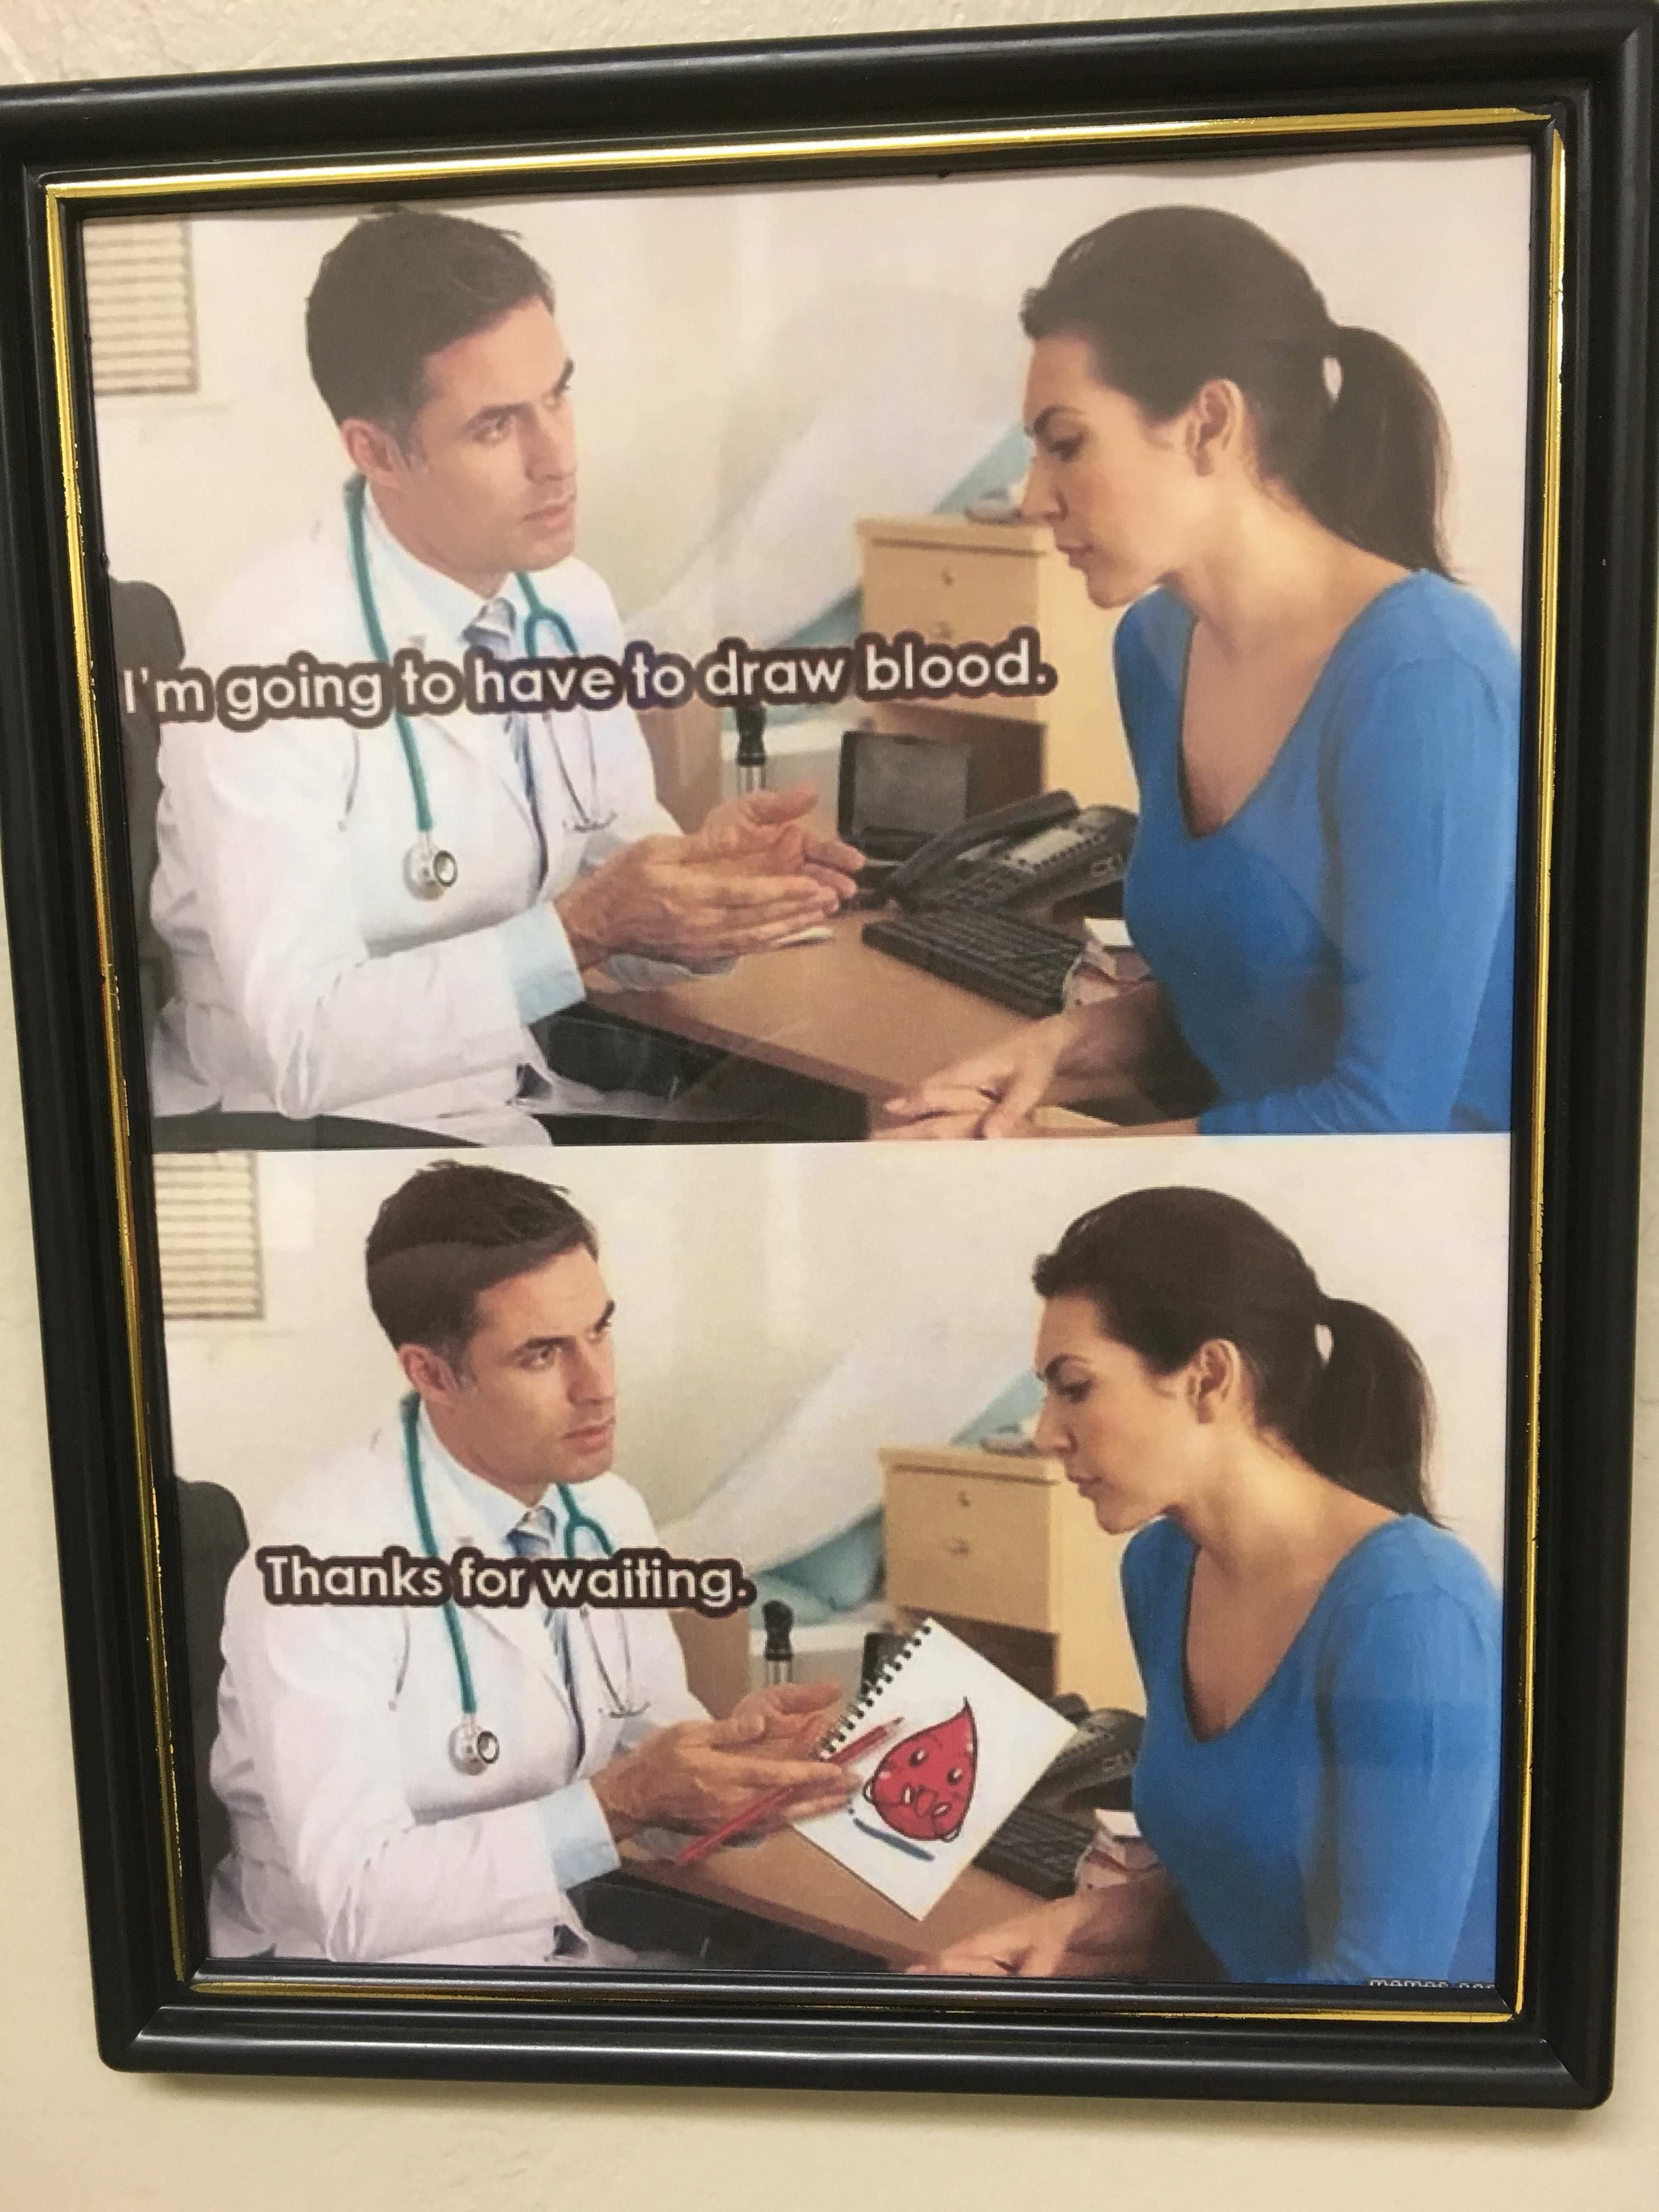 A photo at a doctor's office